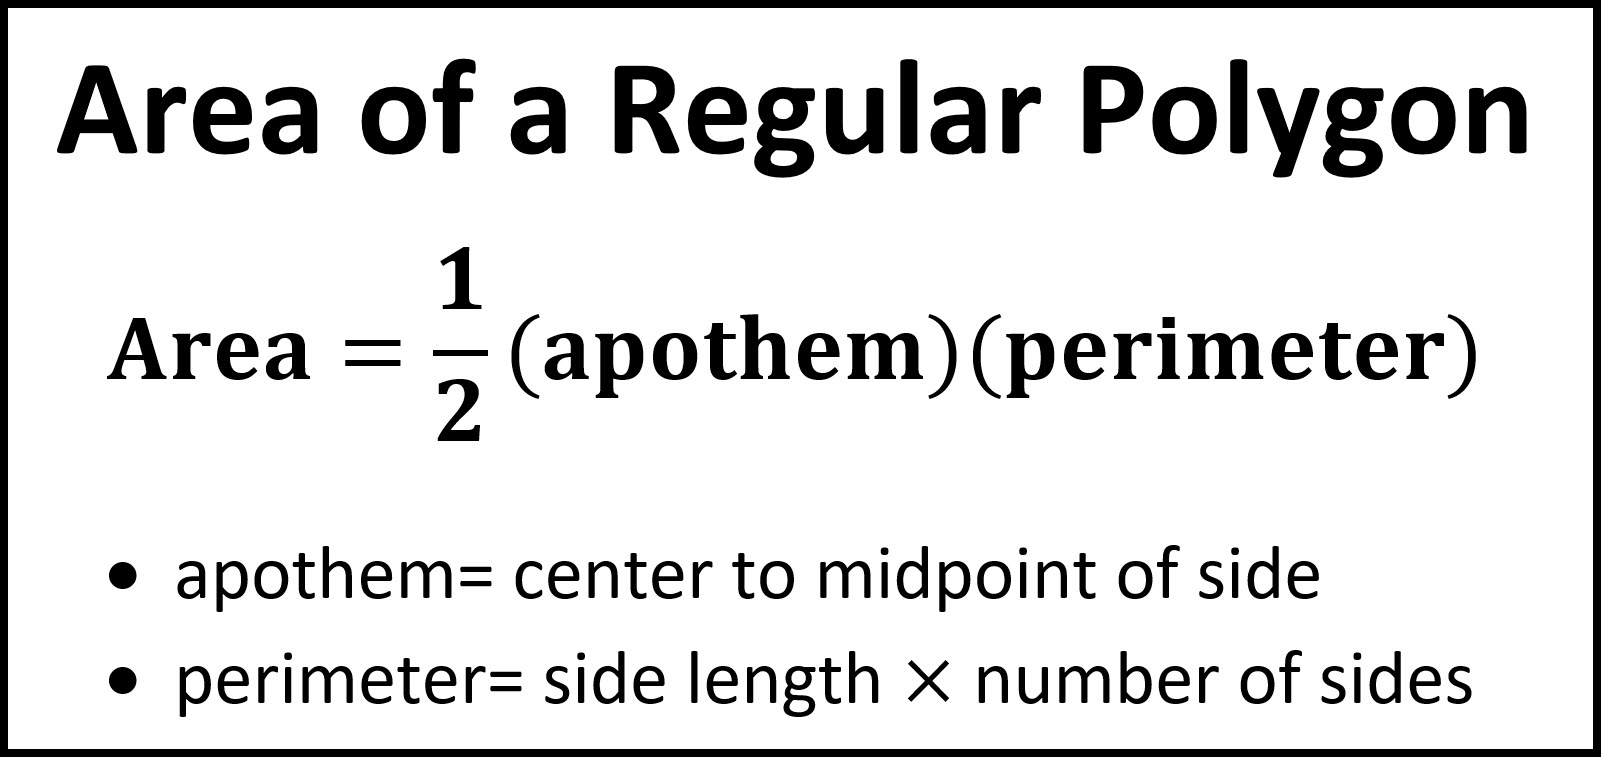 Notes for Area of Regular Polygons